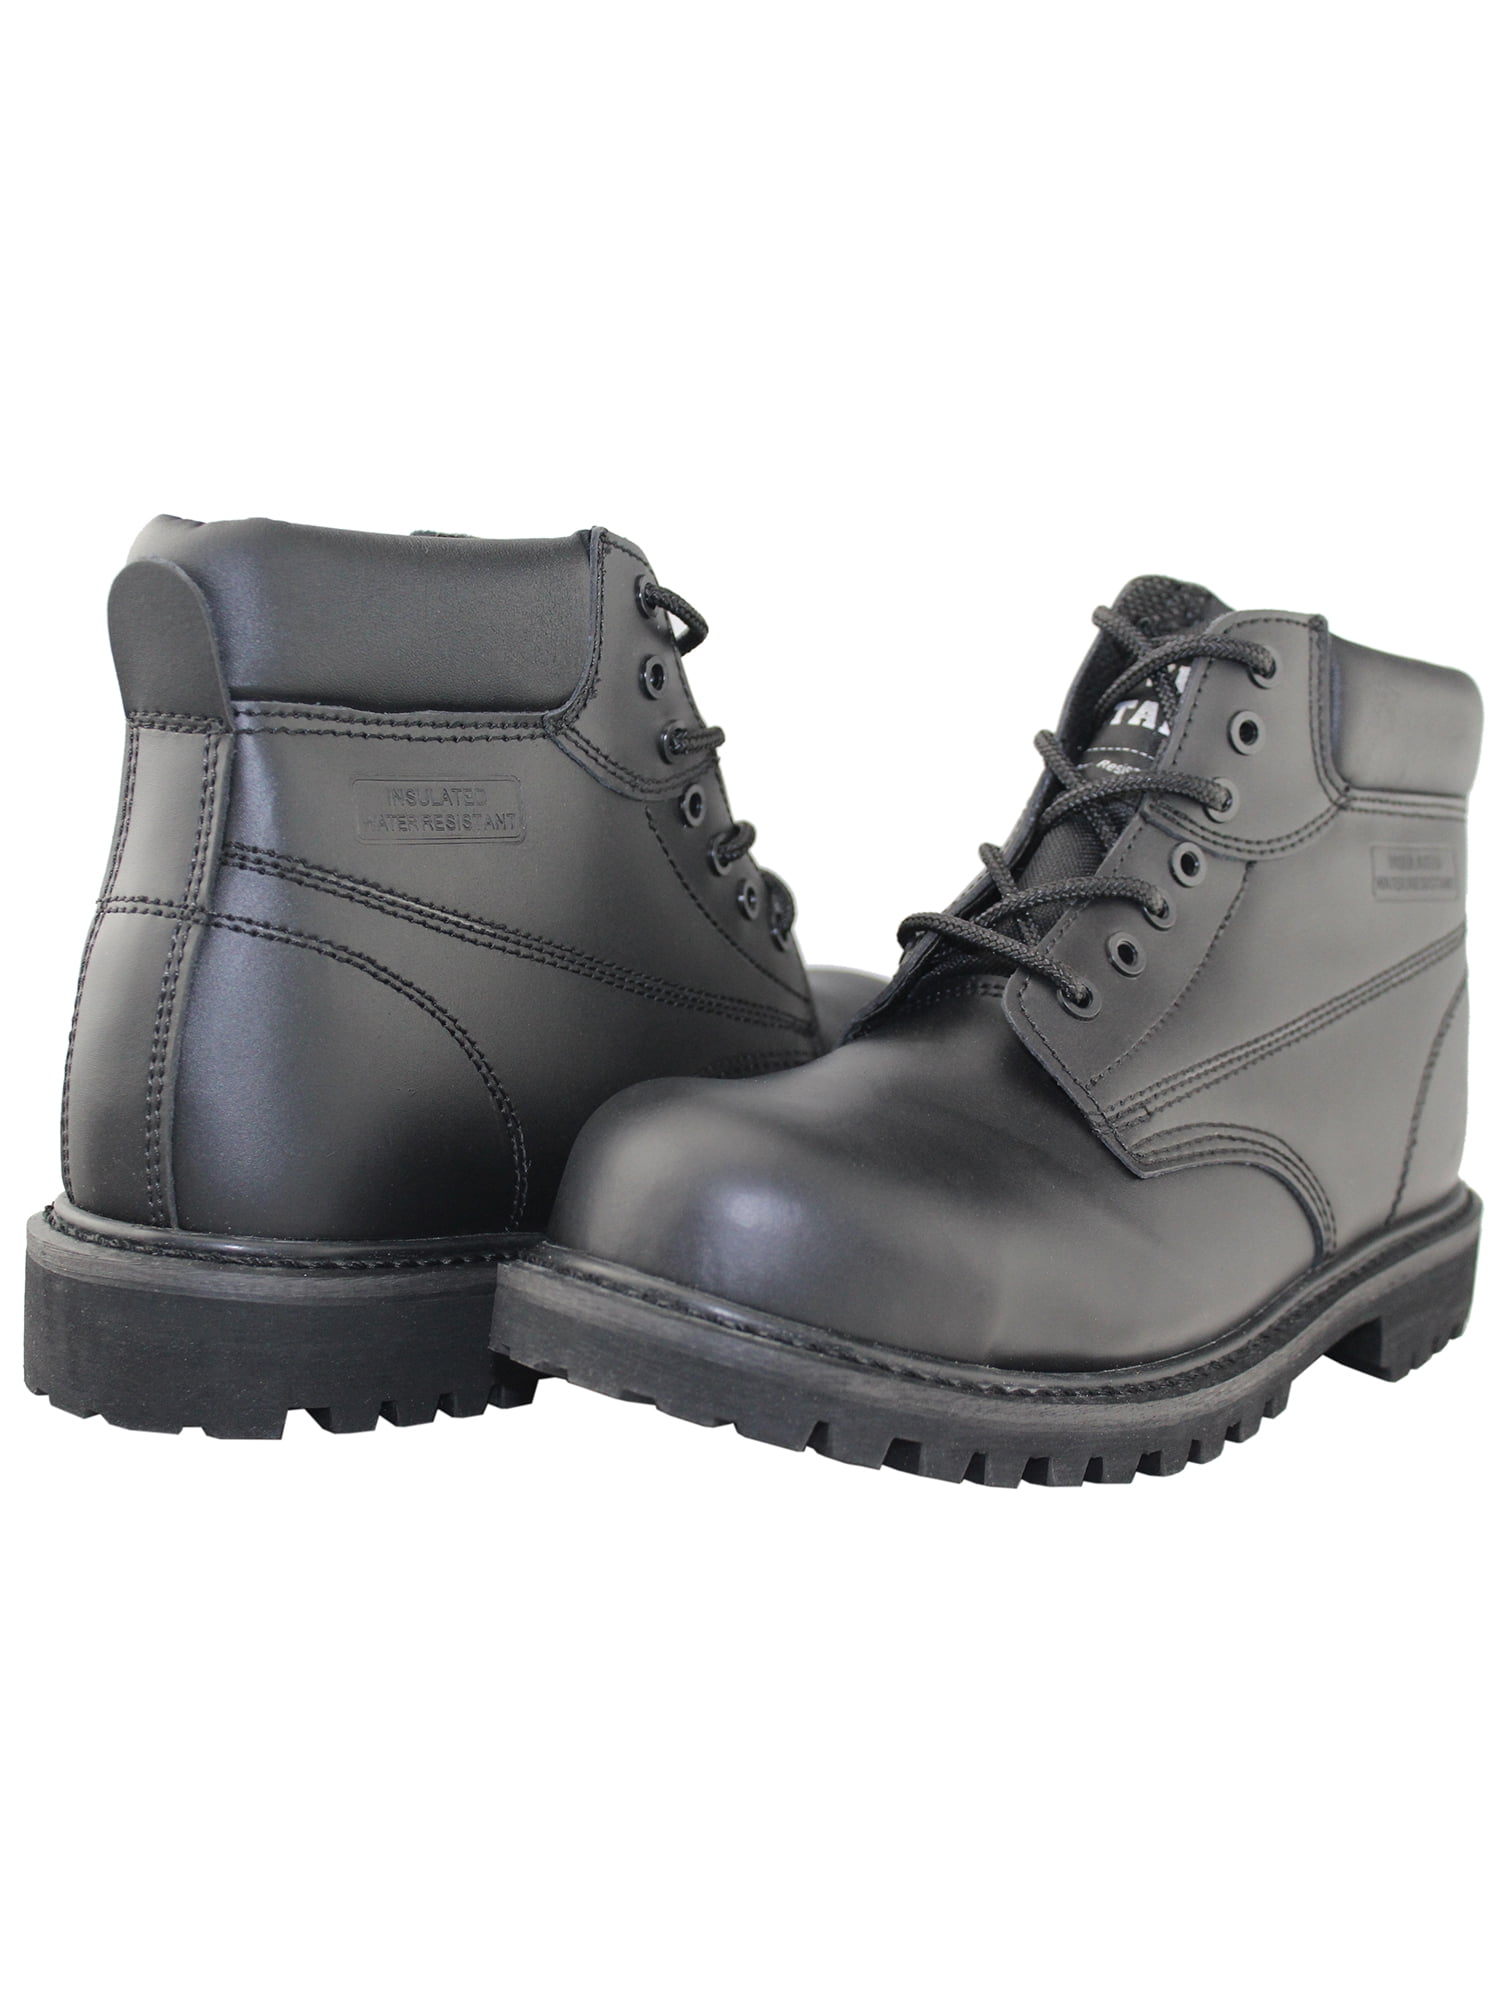 mens insulated casual boots